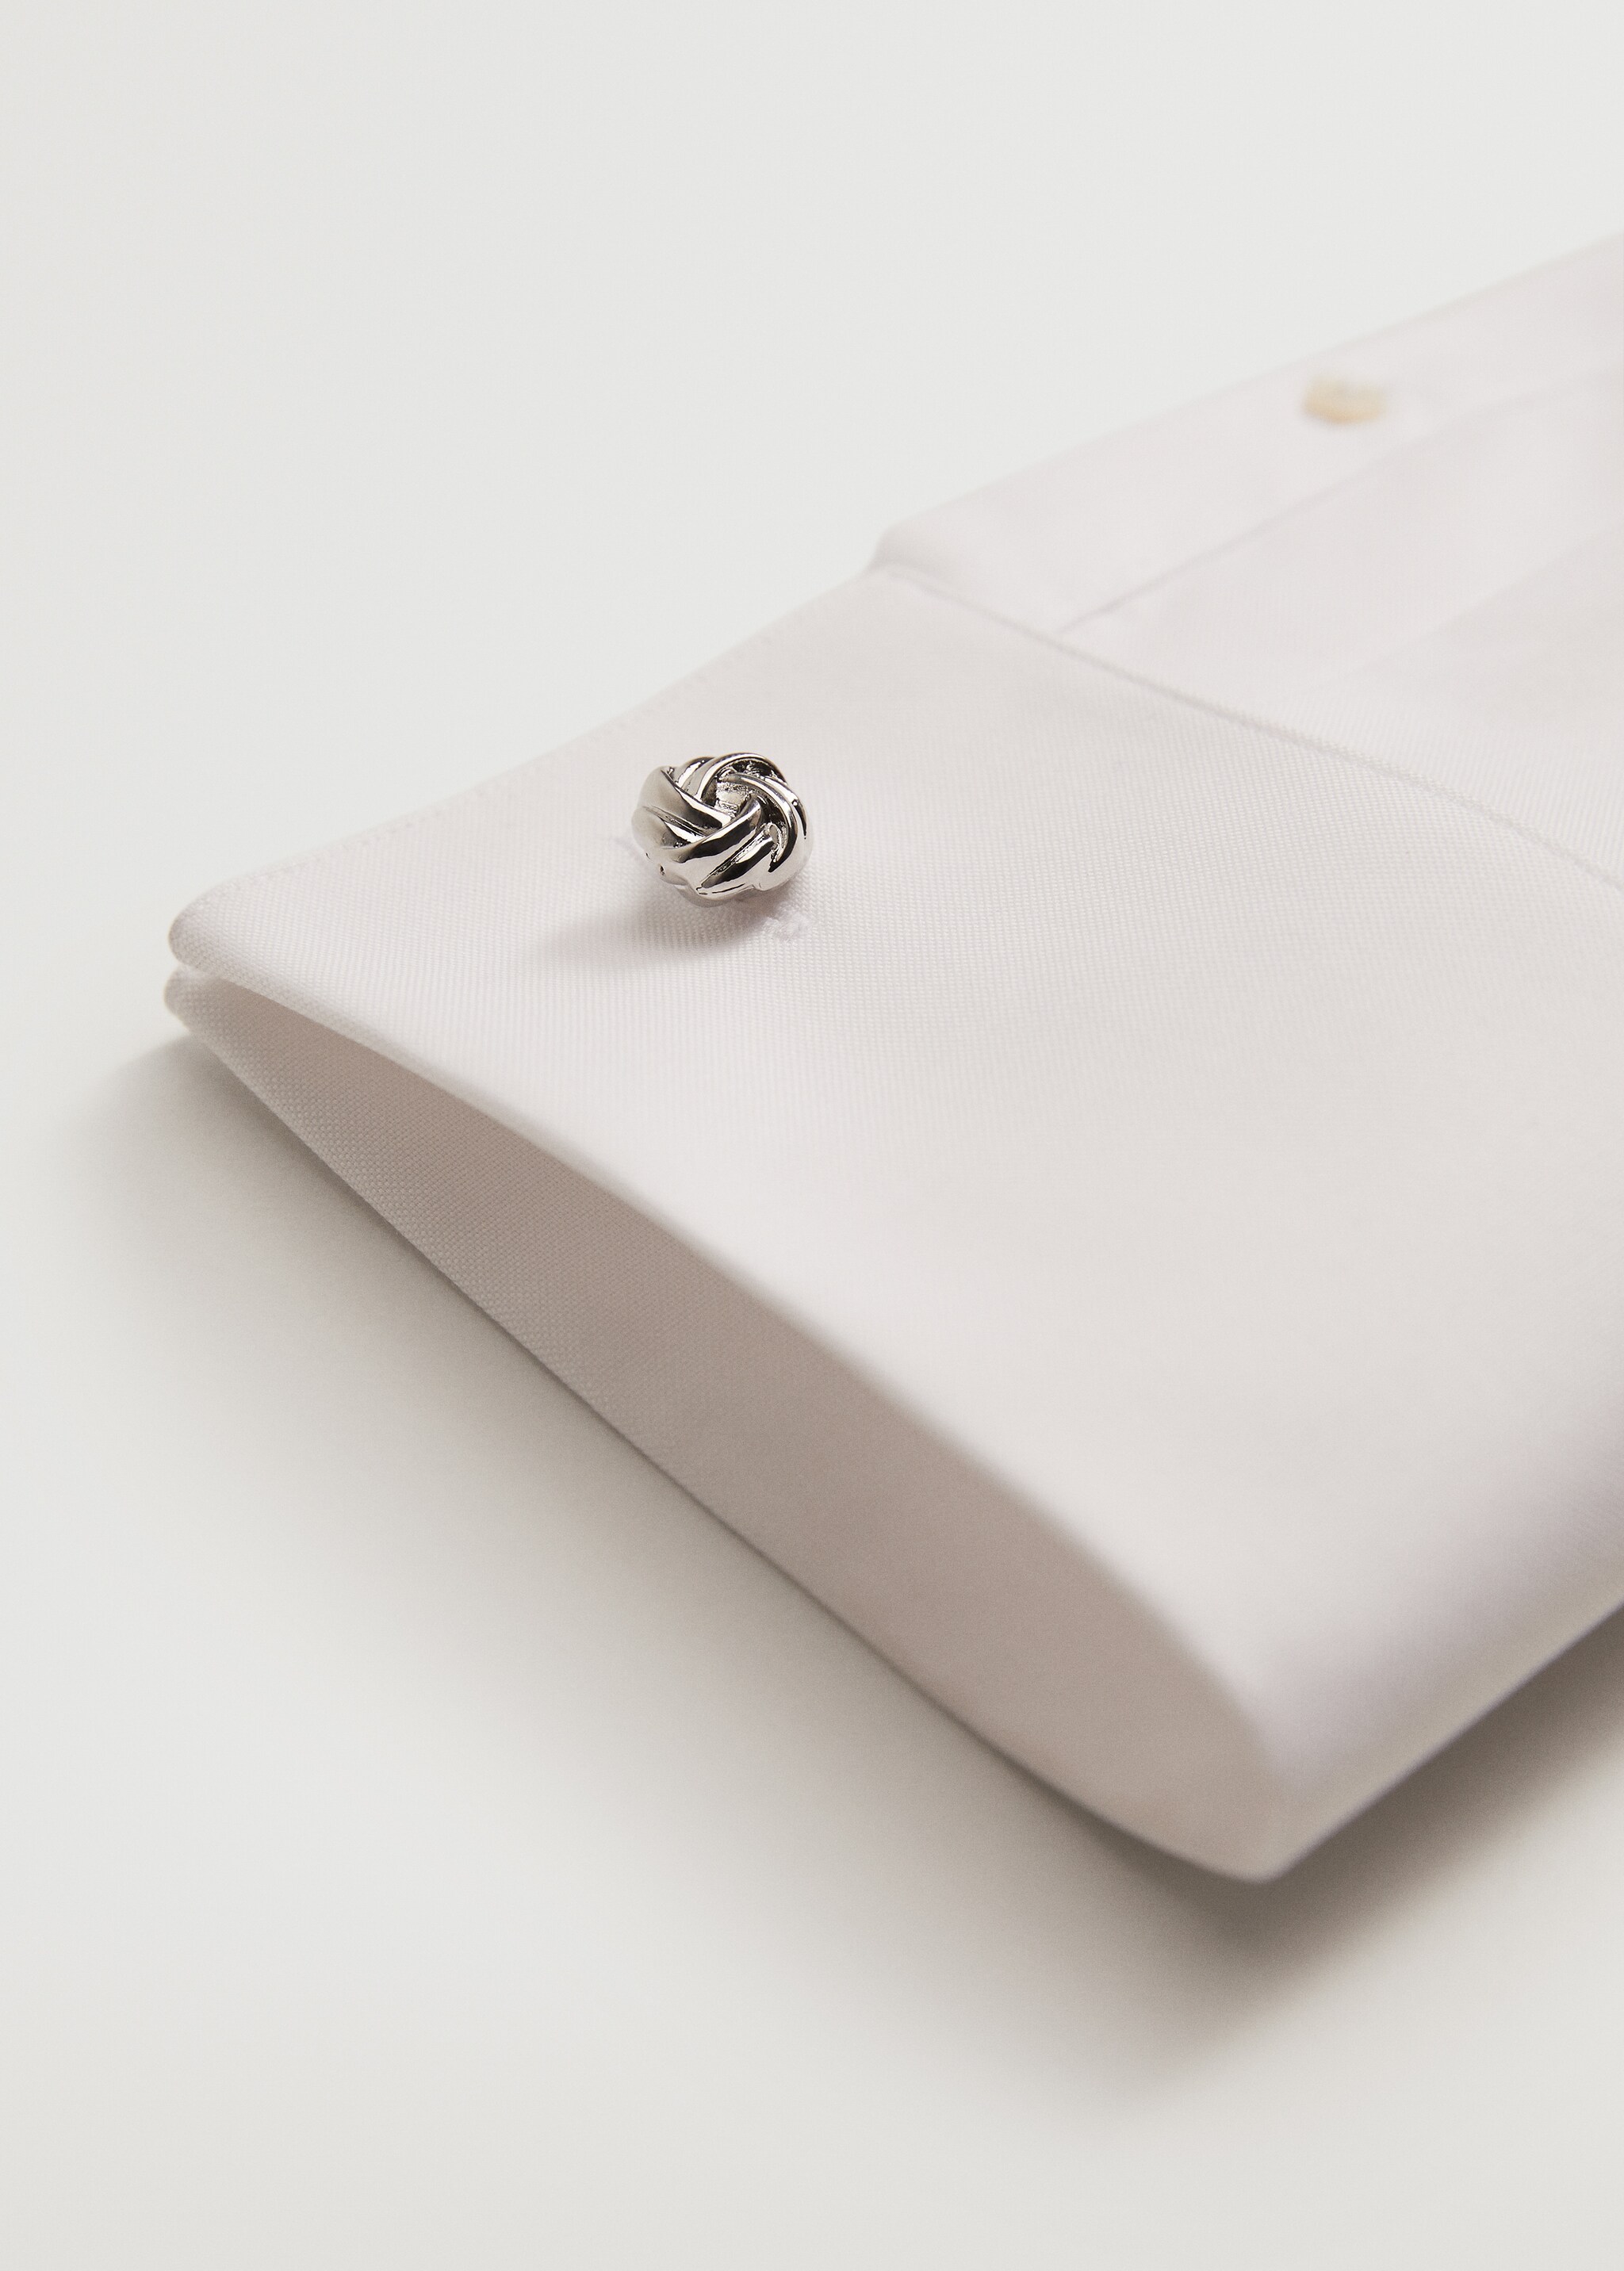 Knot Cufflinks - Details of the article 2